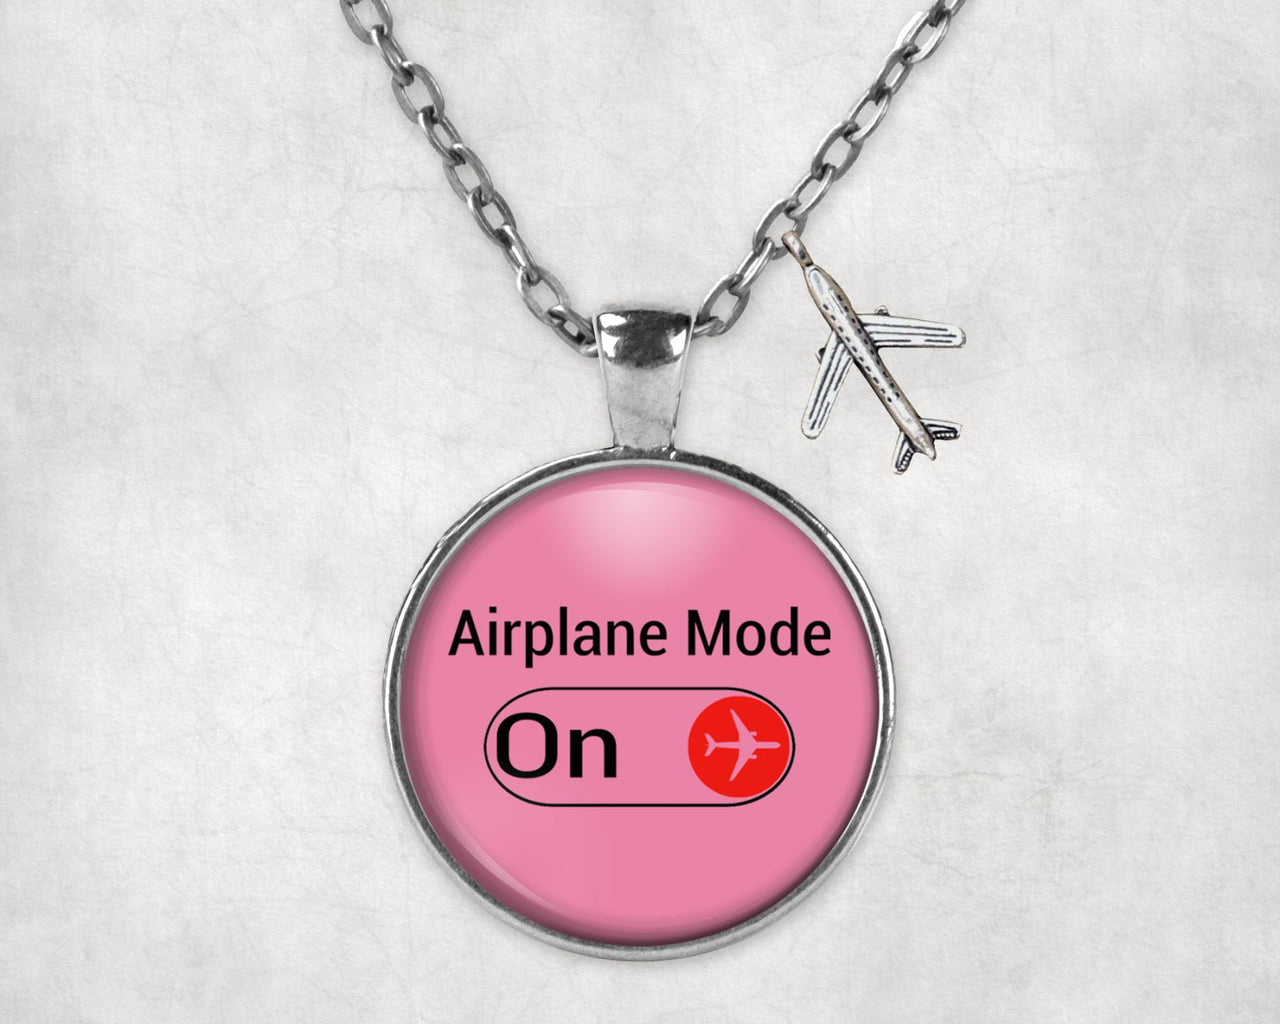 Airplane Mode On Designed Necklaces